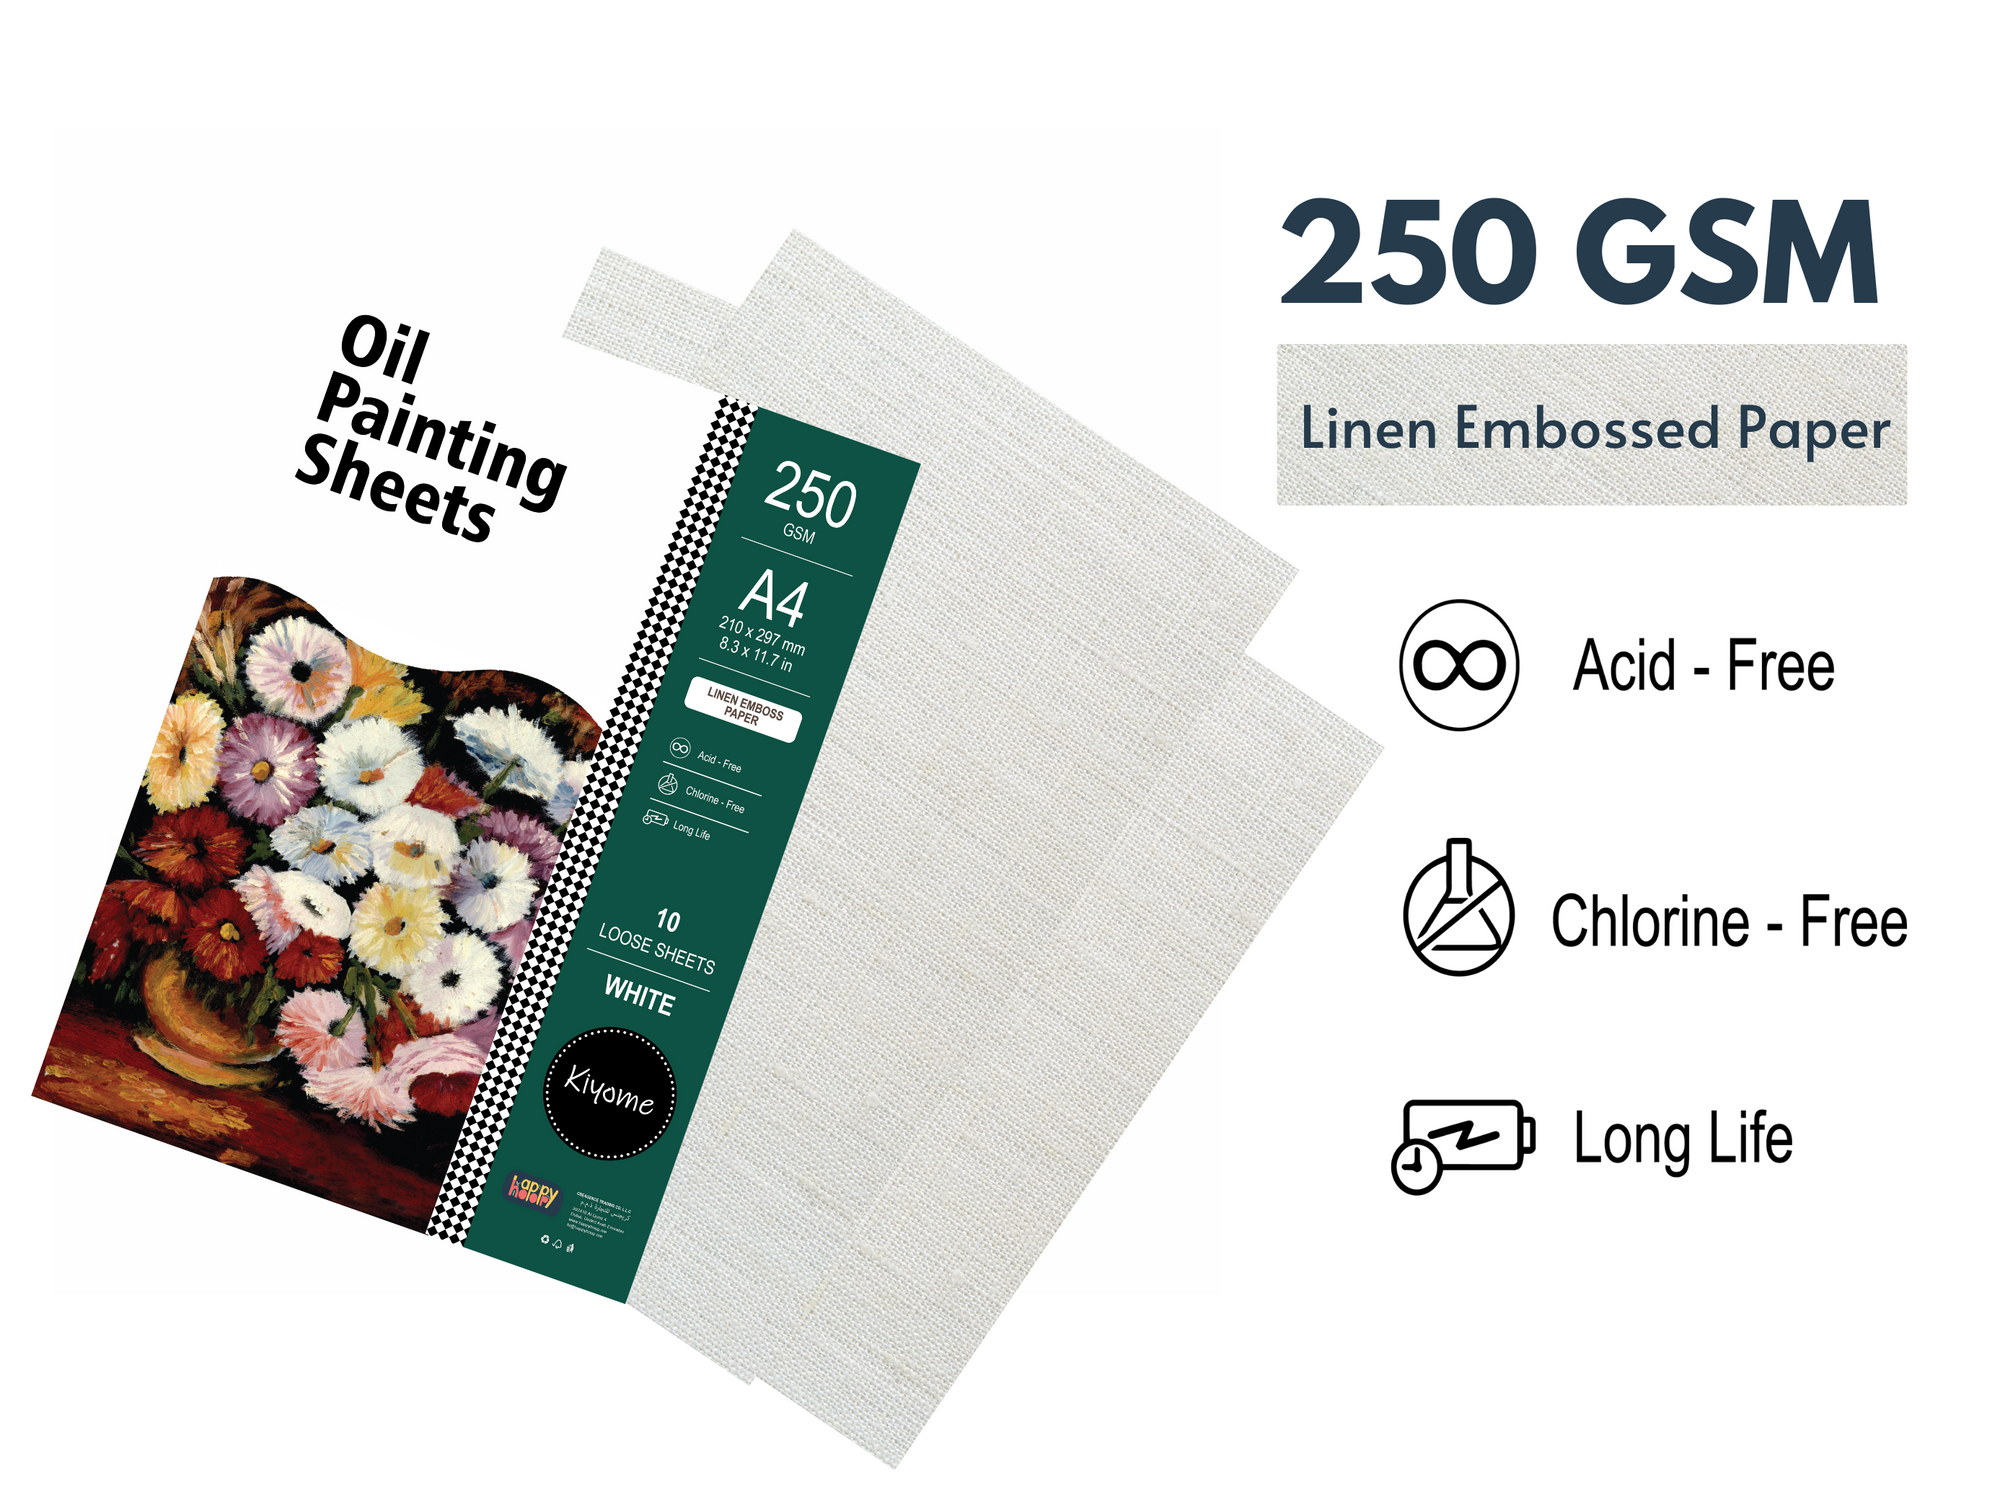 Kiyome Oil Painting Sheets | 250 GSM | A4 | 10 Sheets